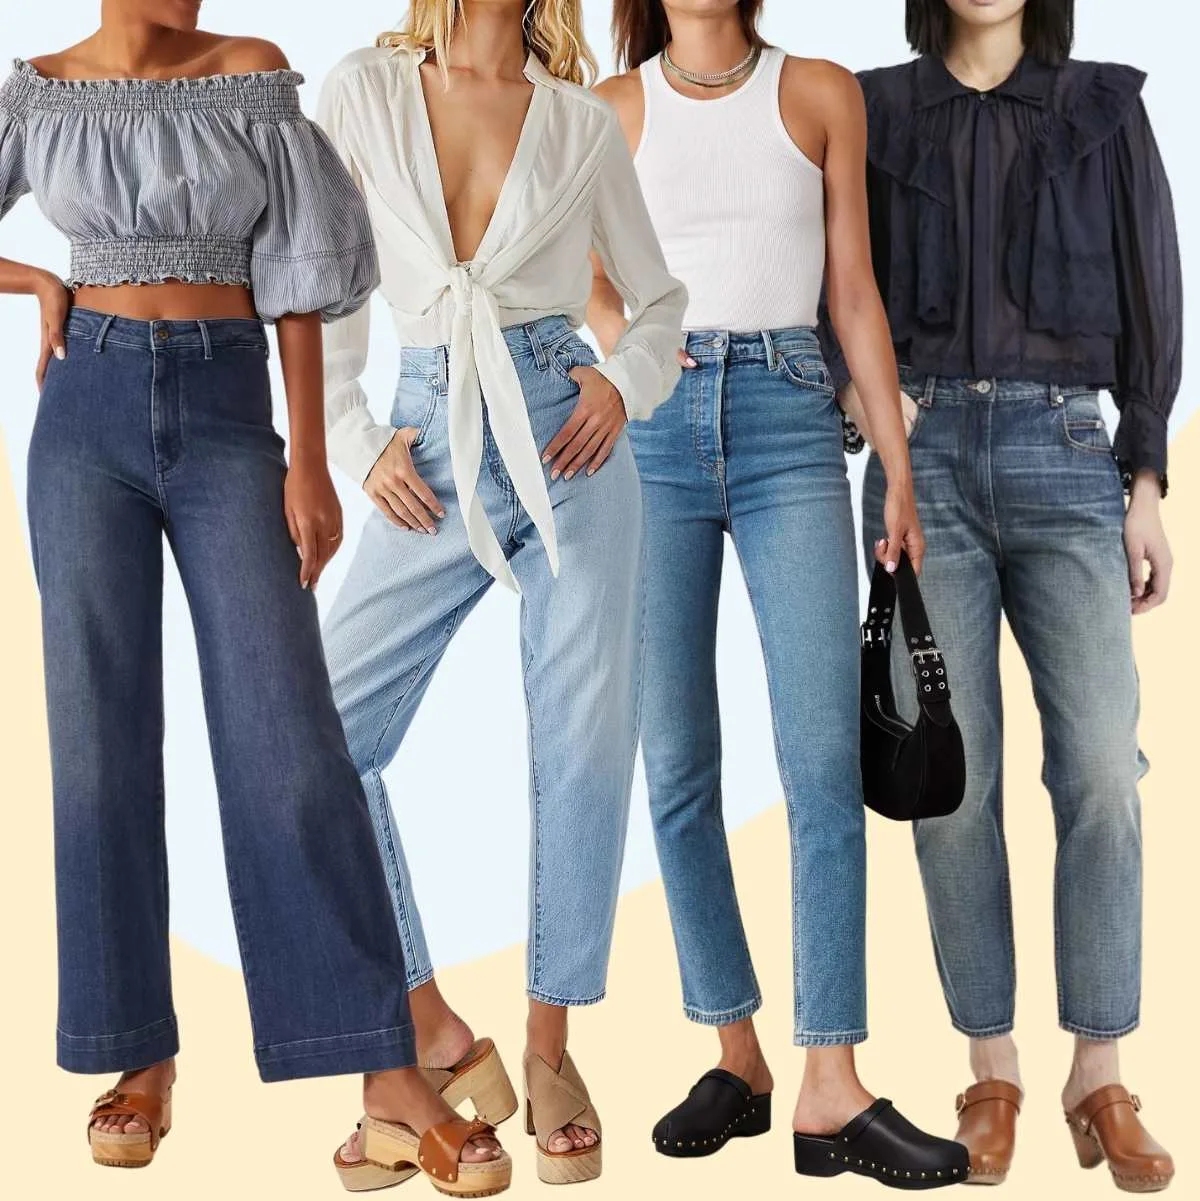 Collage of 4 women wearing different jeans with clogs outfits.